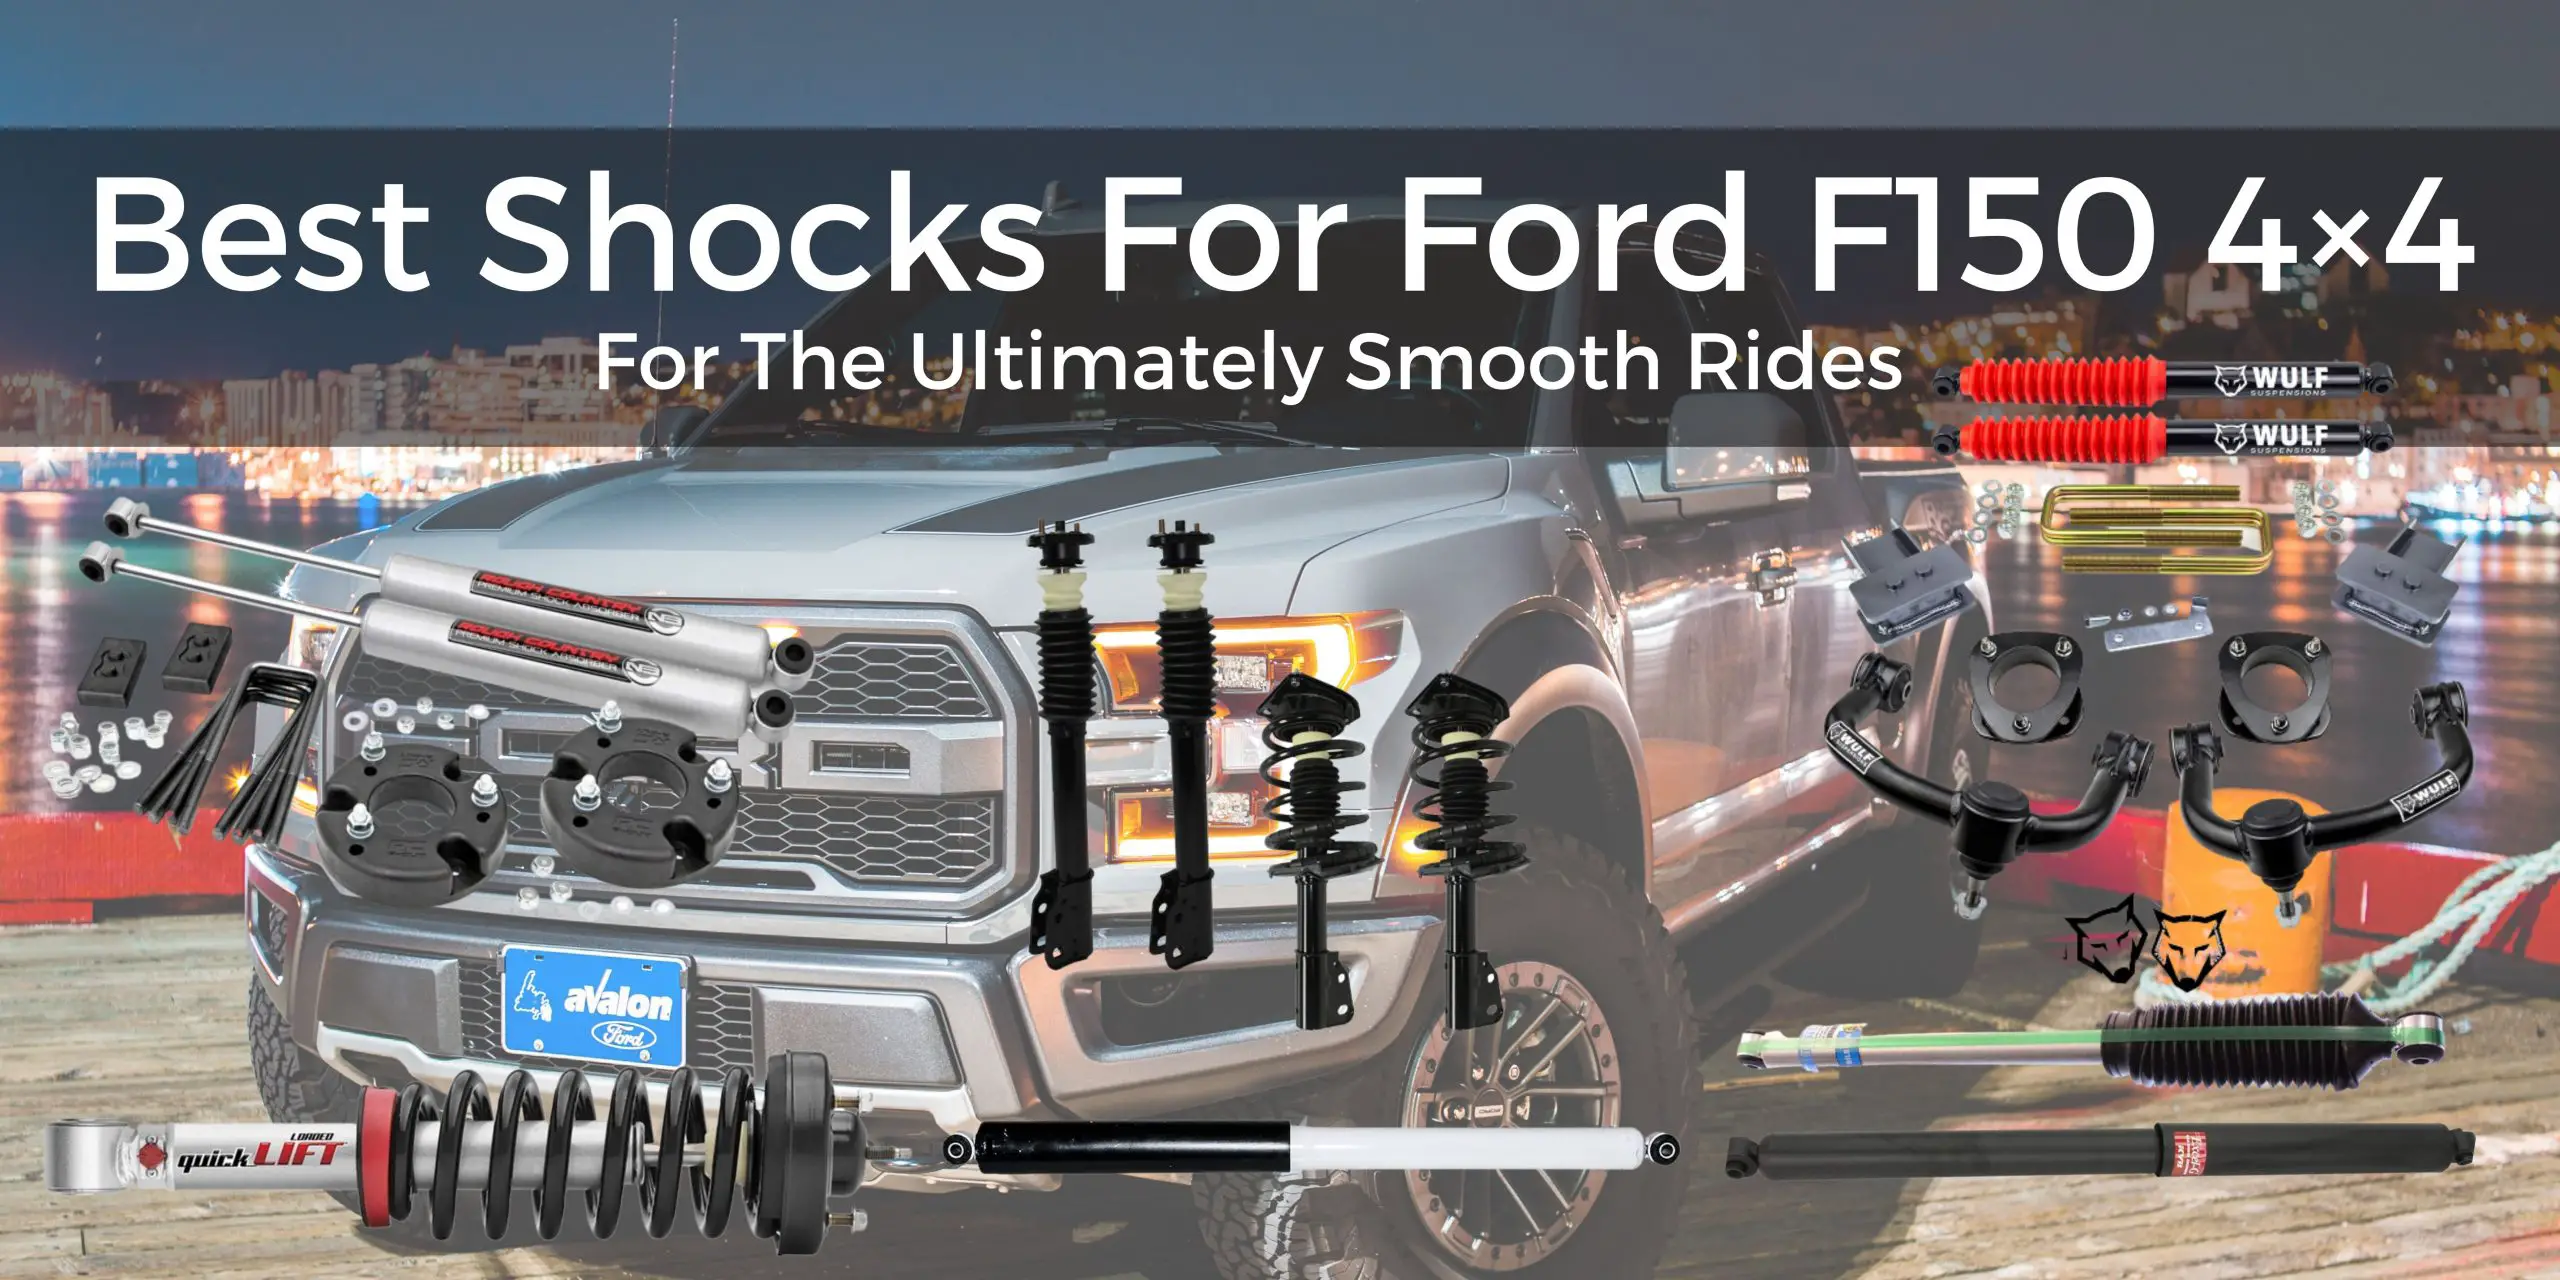 Best Shocks for Ford F150 4x4